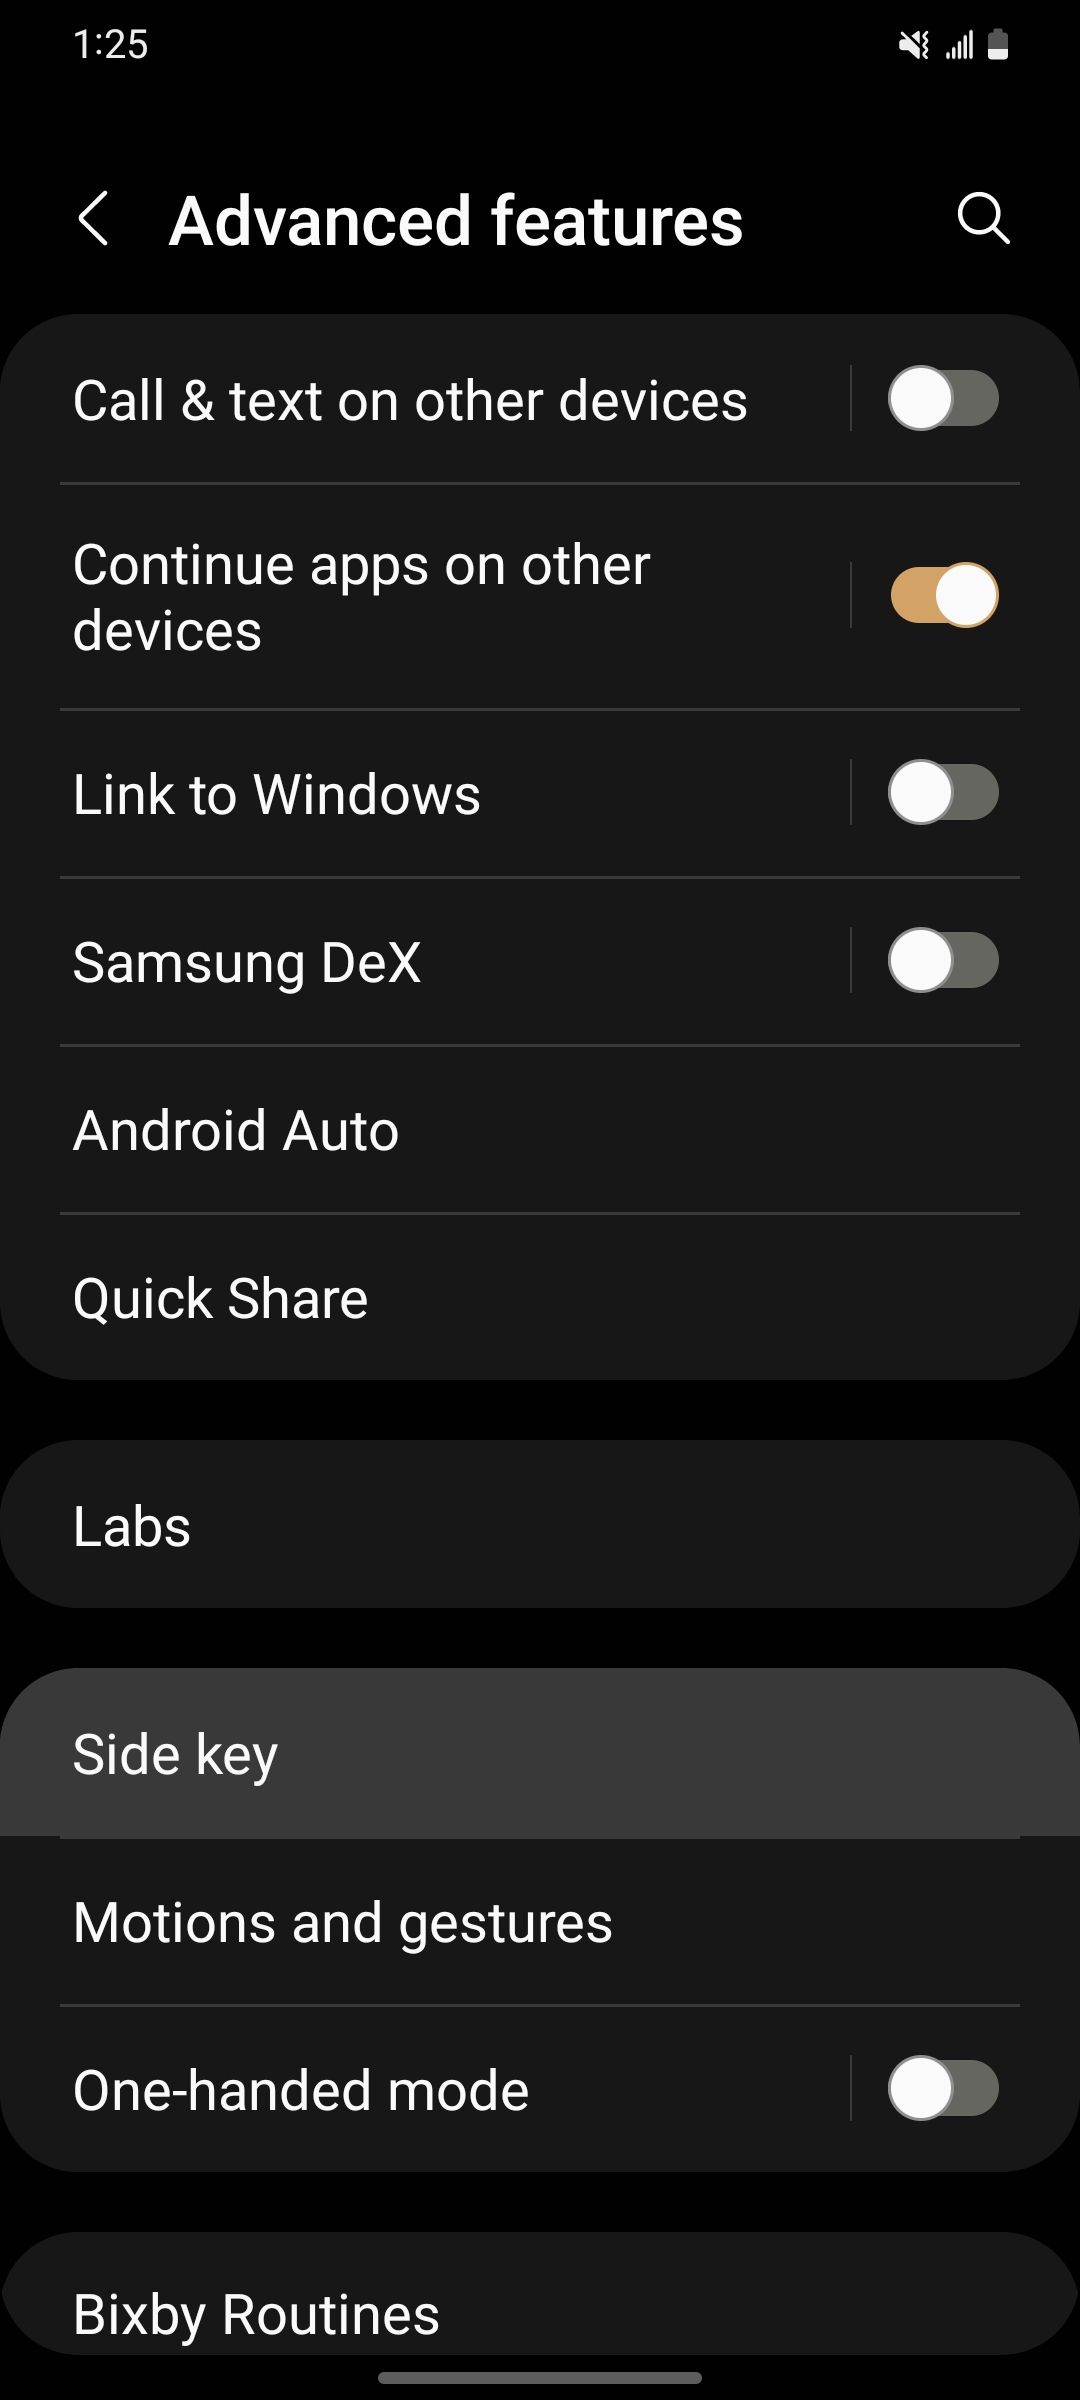 Highlighting the Side key section in Advanced features on a Samsung Galaxy phone